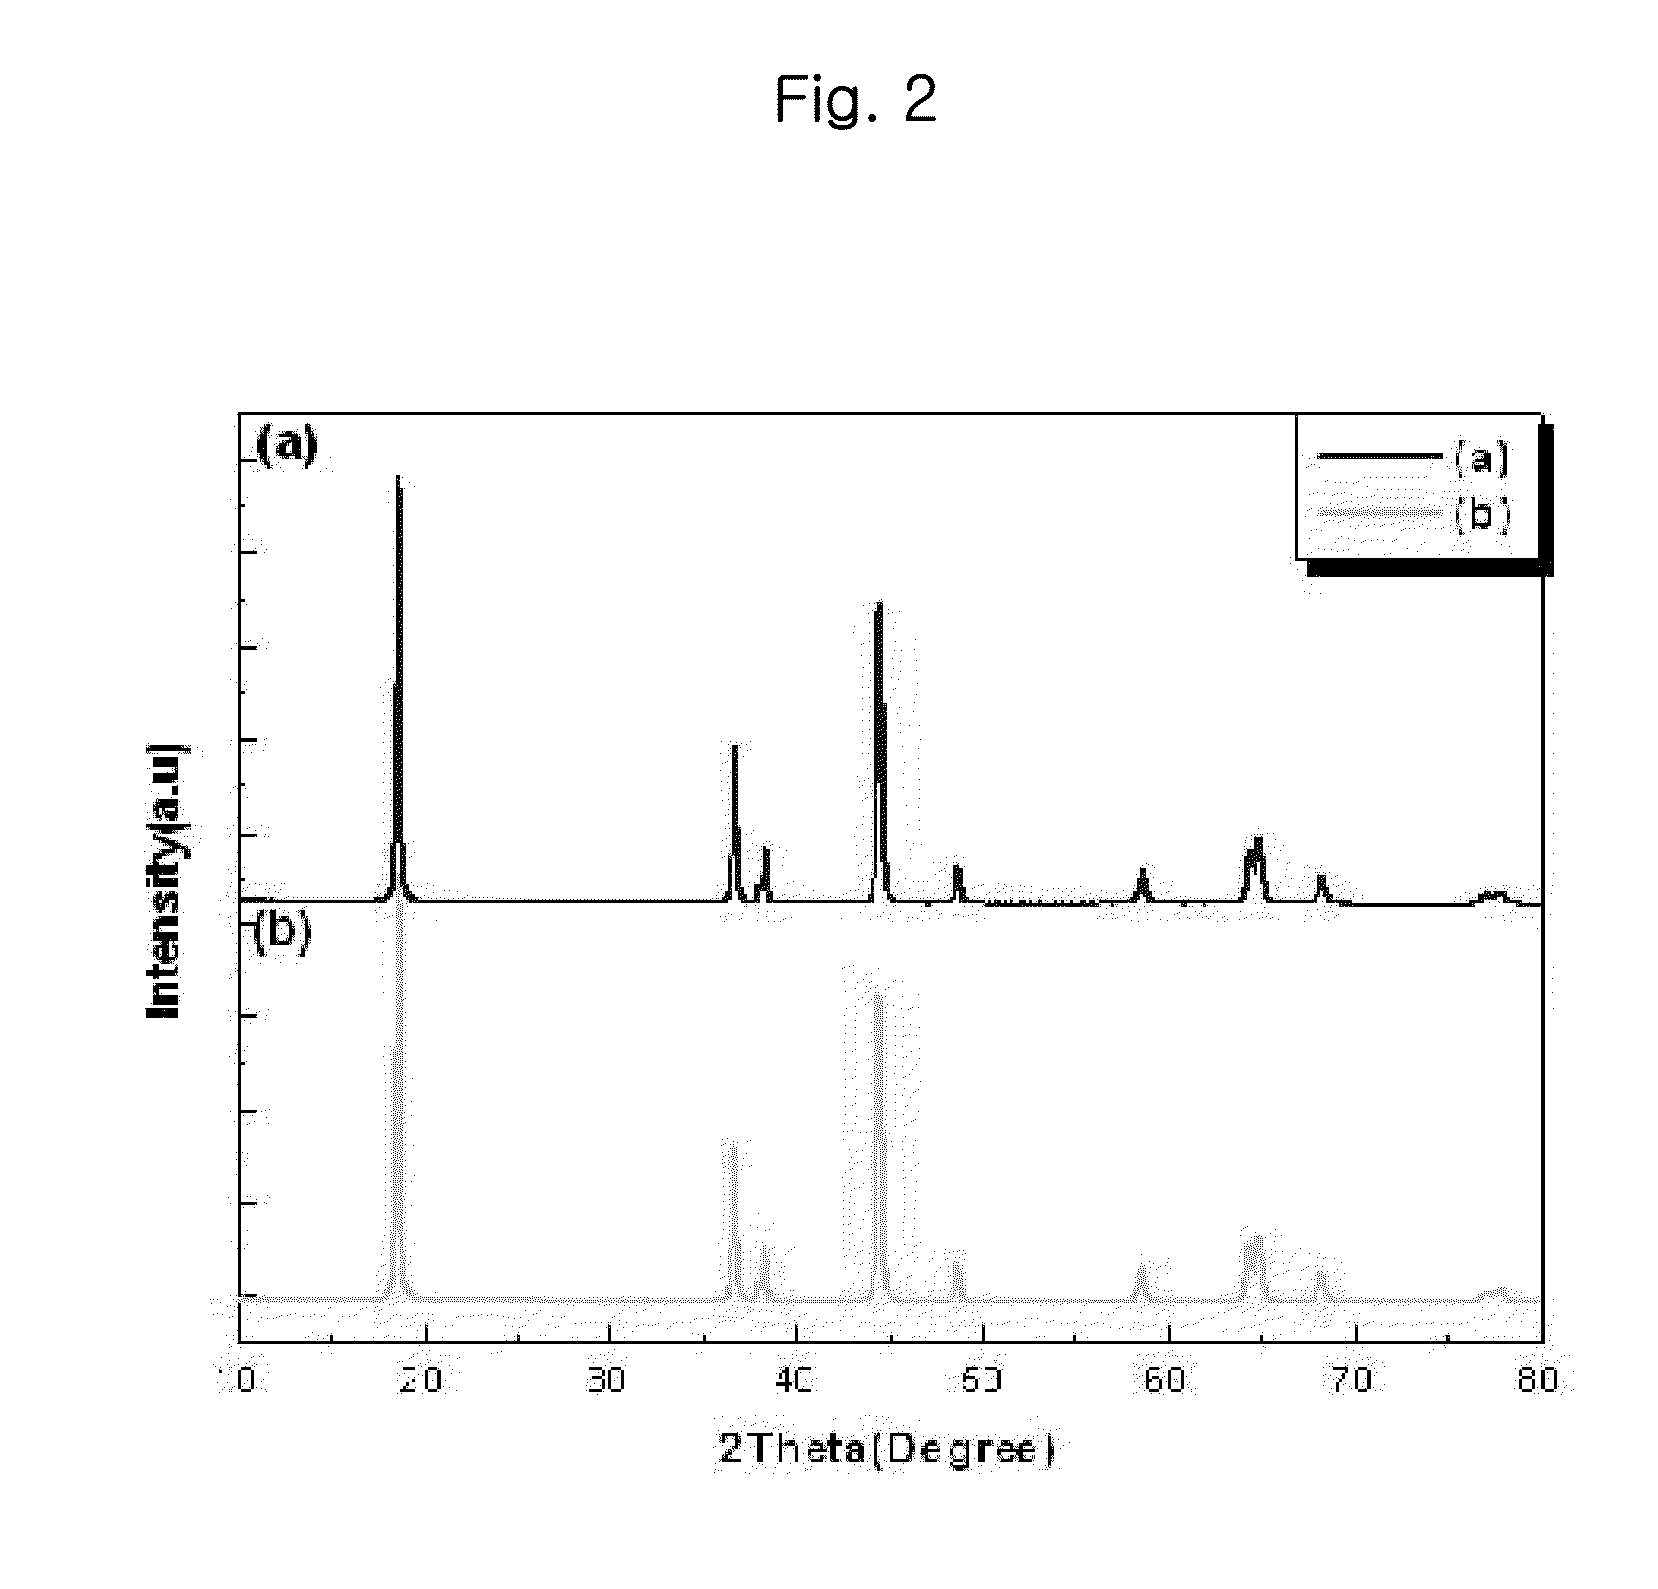 Method for preparing positive electrode active material precursor and positive electrode material for lithium secondary battery having concentration-gradient layer using batch reactor, and positive electrode active material precursor and positive electrode material for lithium secondary battery prepared by the method